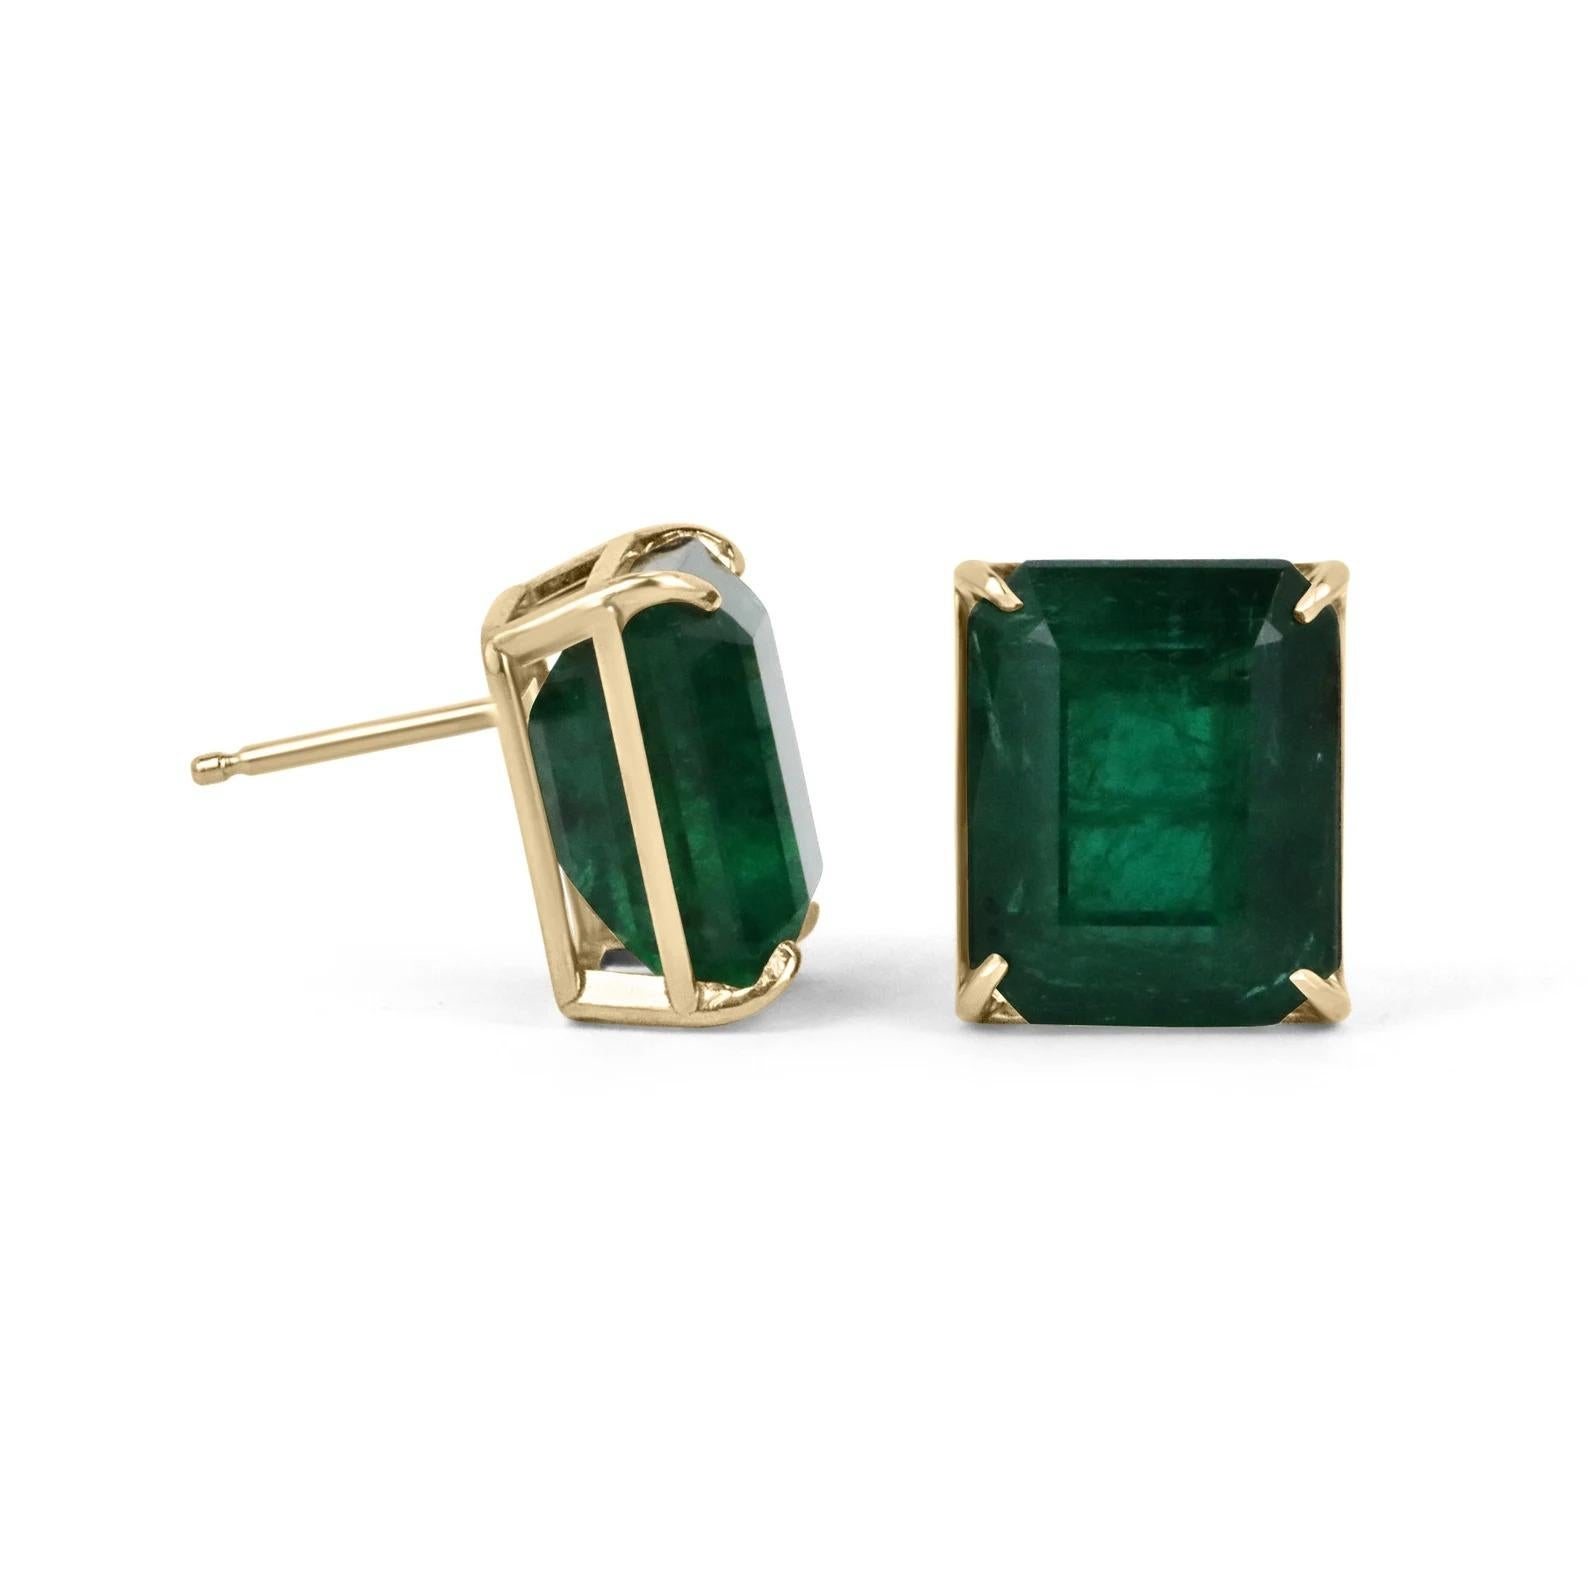 Featured here is a LARGE set of emerald cut, top-quality Zambian Vivid Dark Green emerald studs handcrafted and set in fine 18K yellow gold. Displayed are vivacious deep-green emeralds with very good transparency, accented by elegant claw prongs,